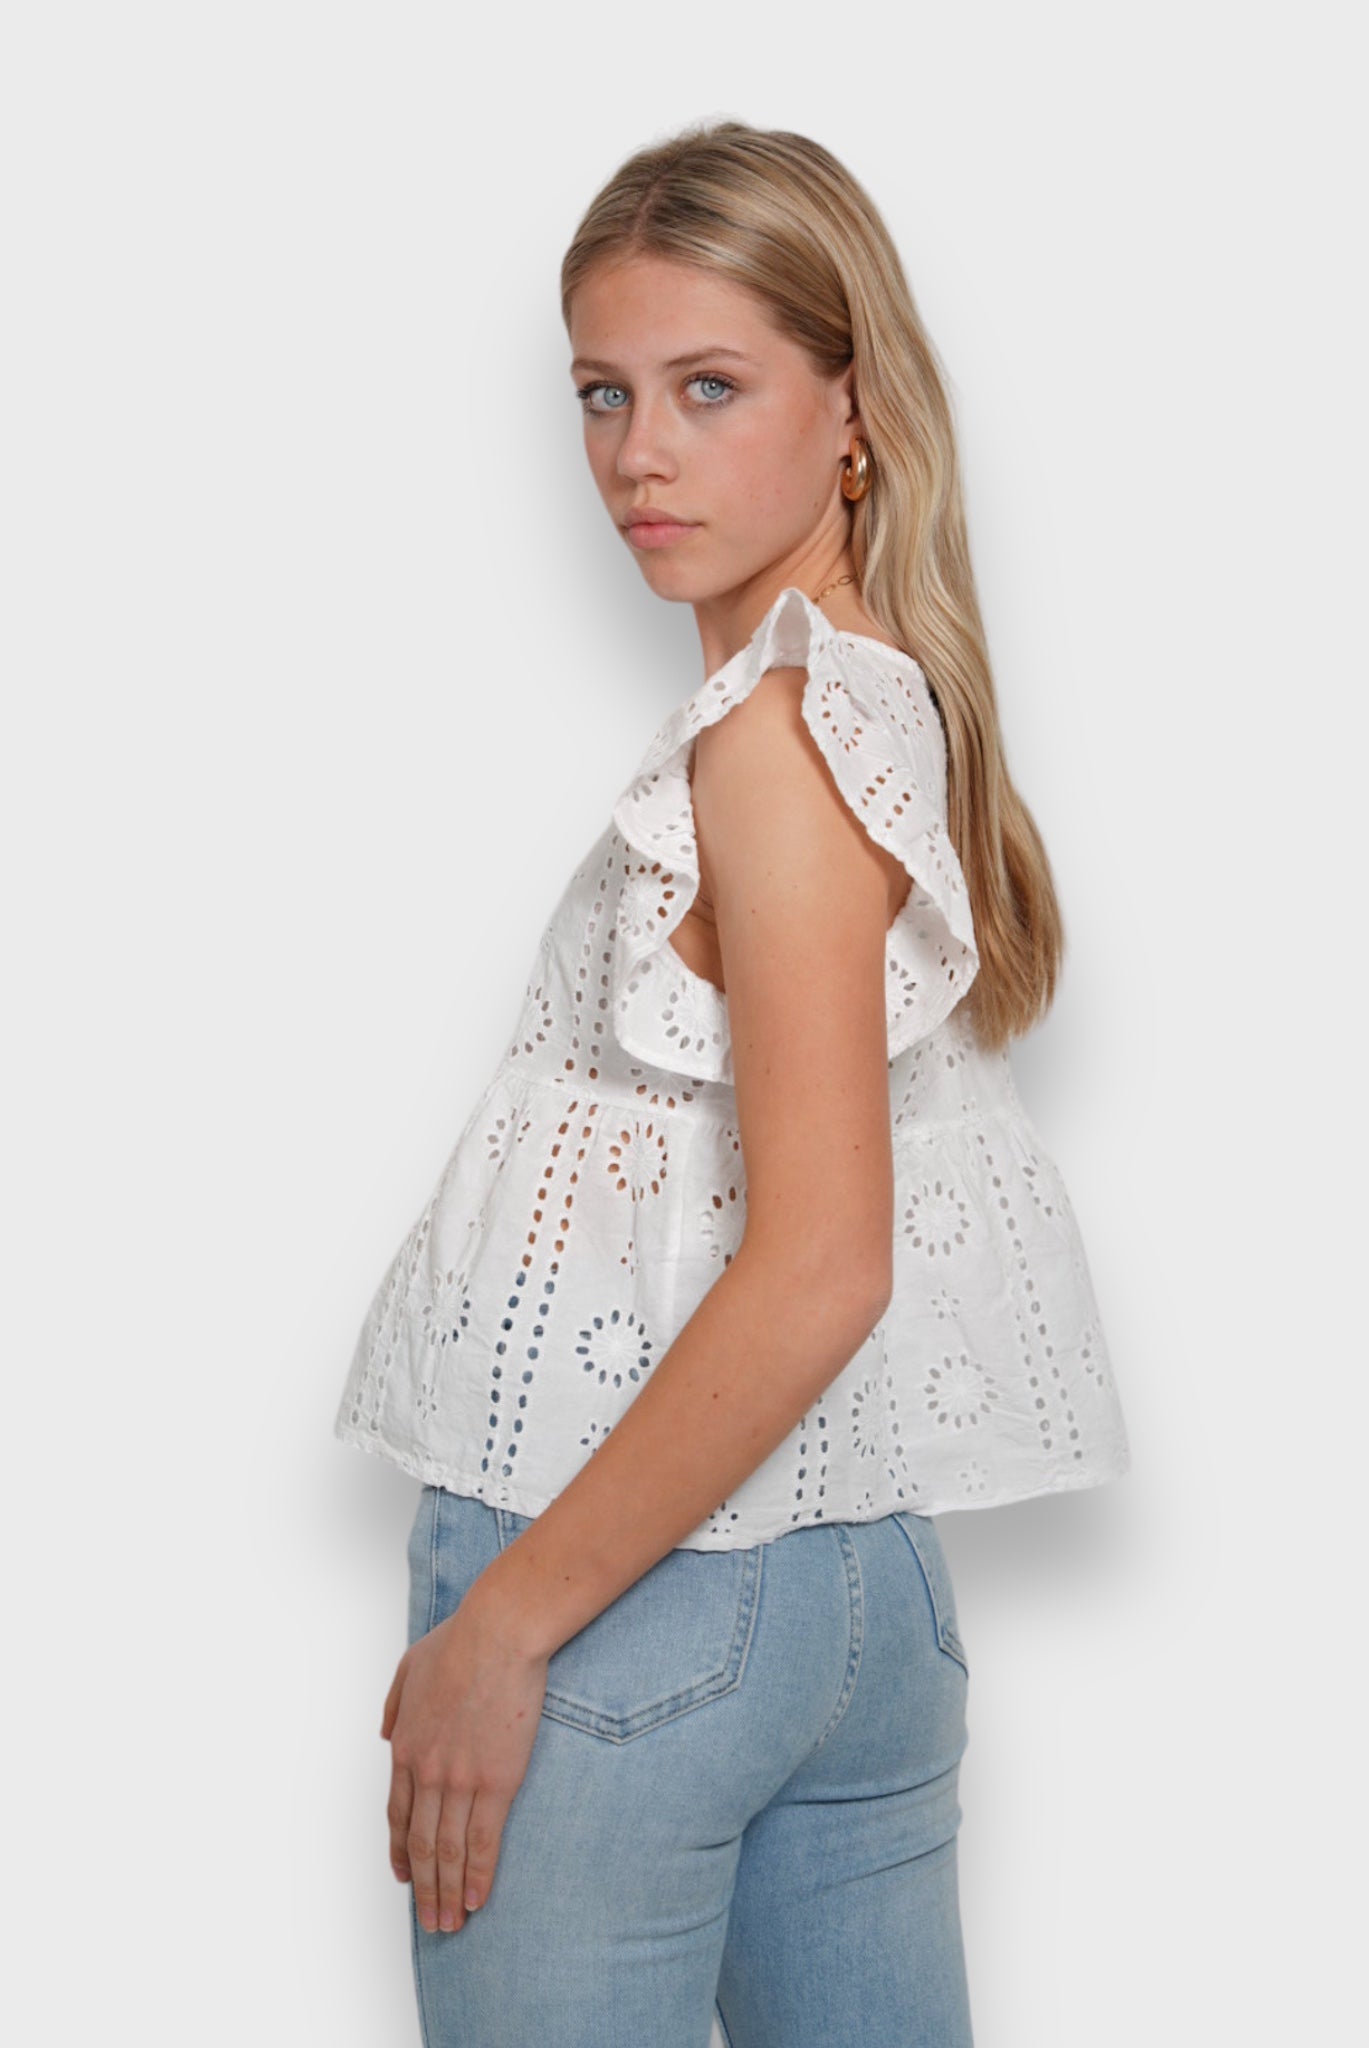 "Floral" top white